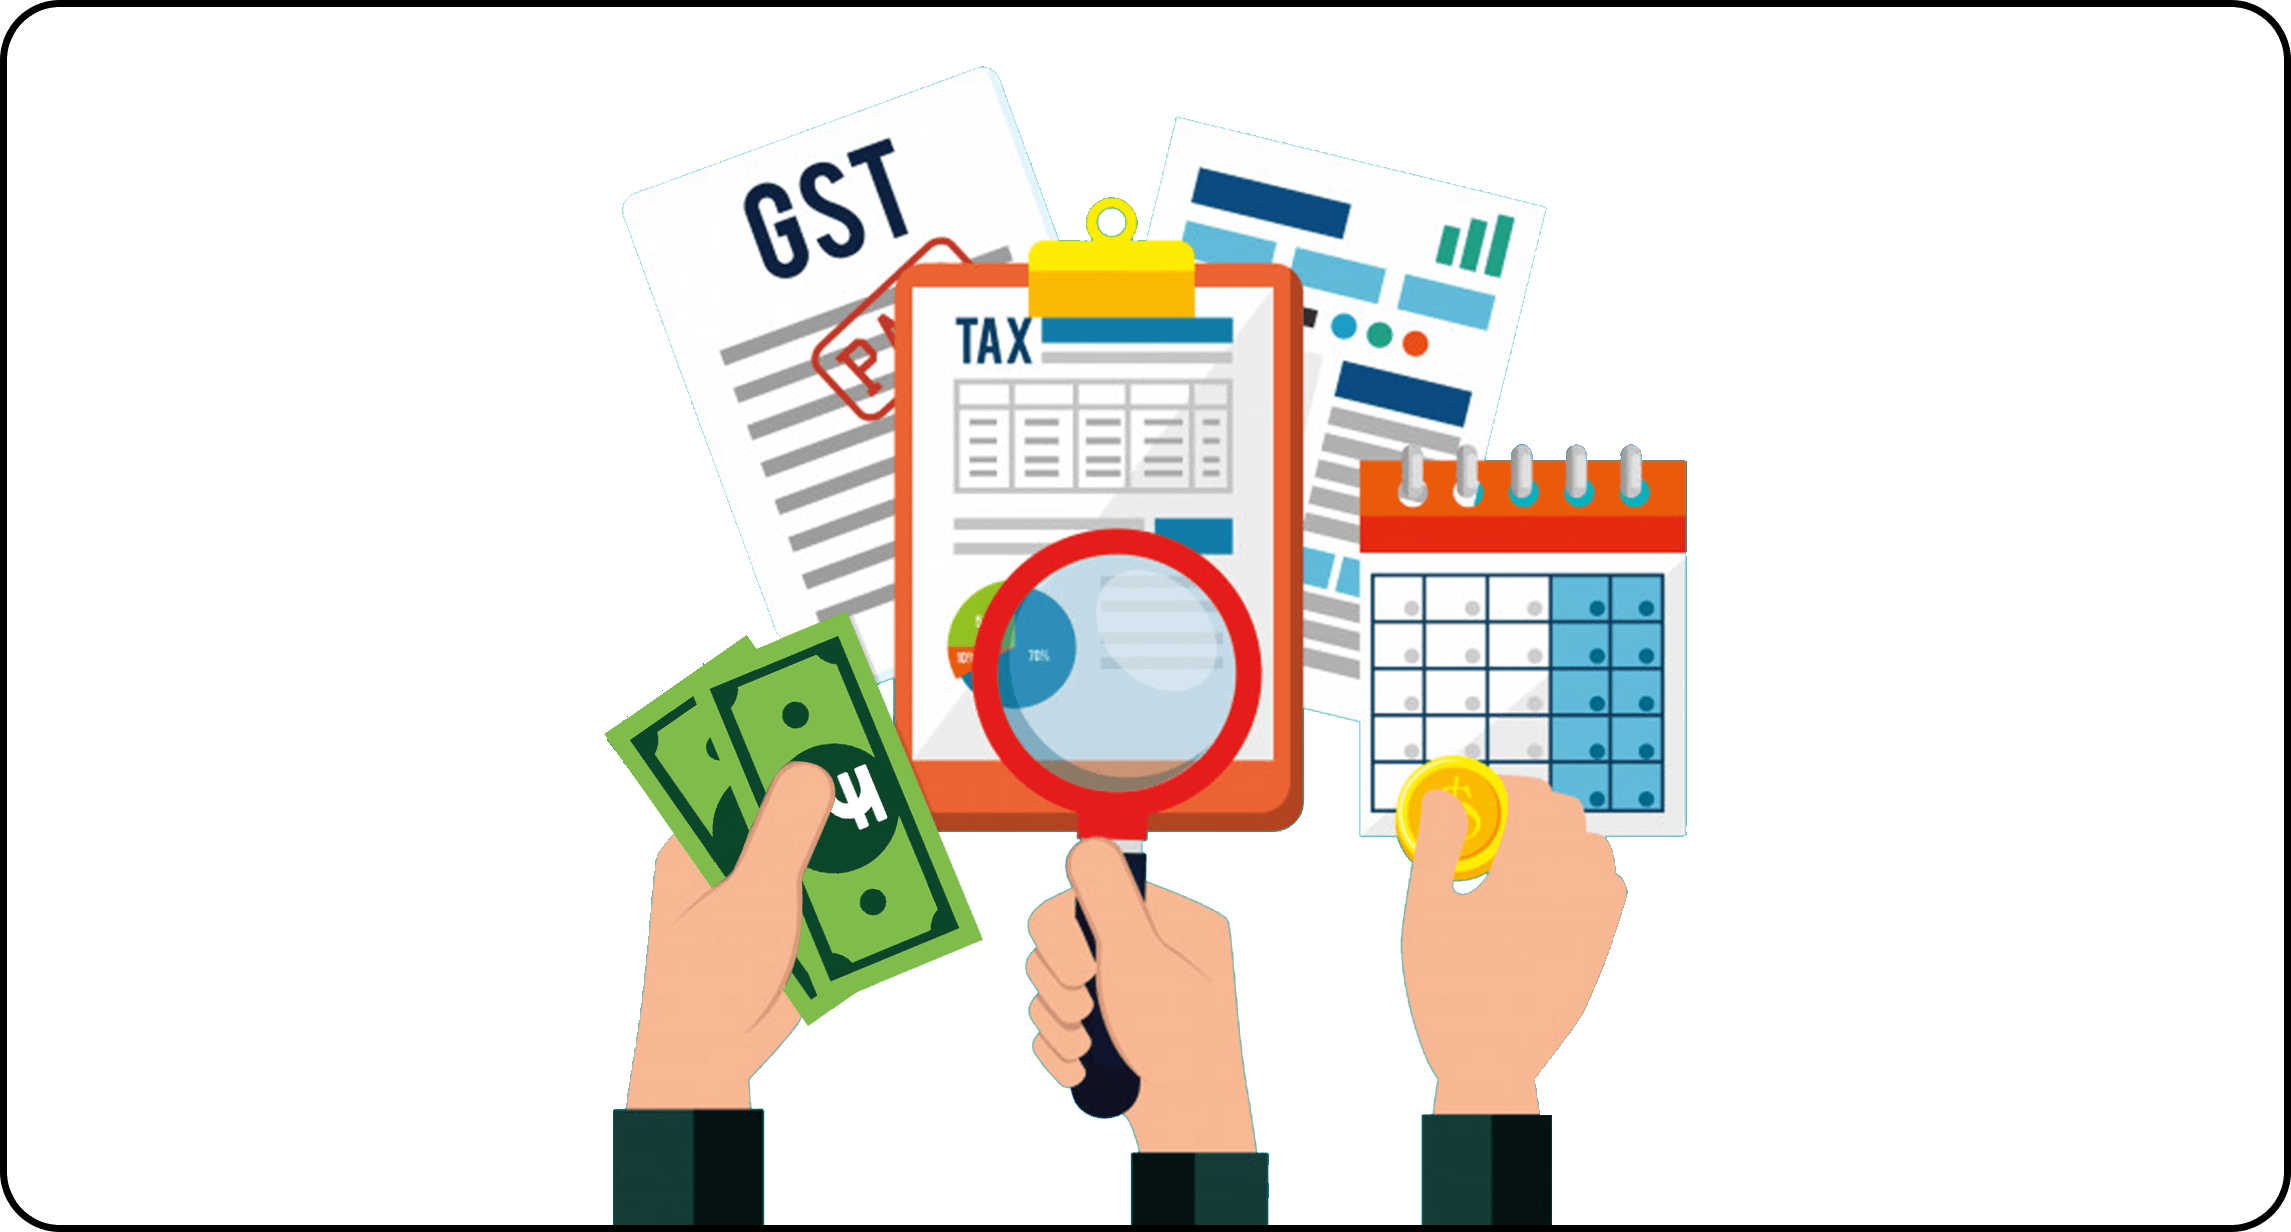 gst tax and money image
